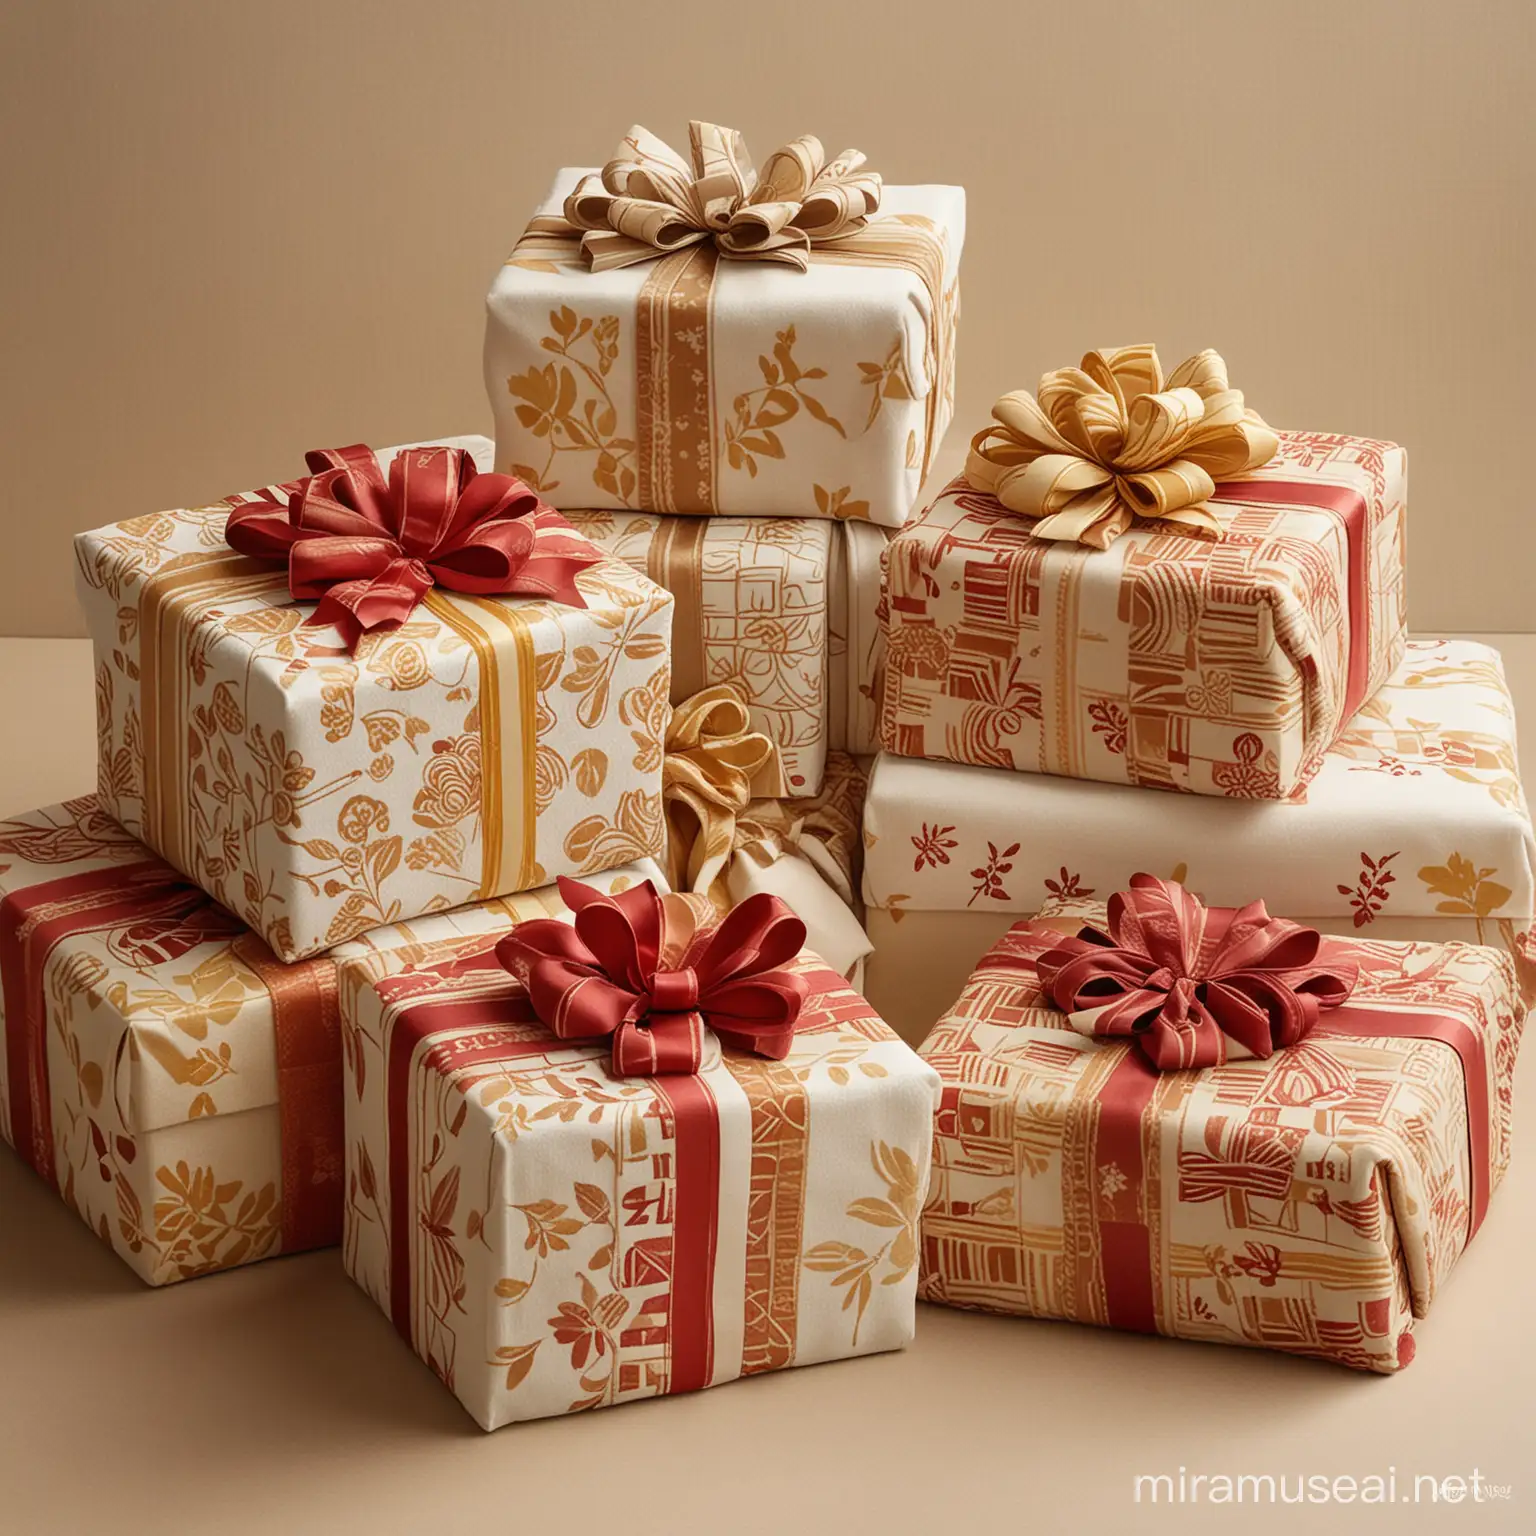 Create a painting featuring a combination of gift boxes adorned with bows and stacks of towels and blankets. The background should be light and beige. The gift boxes themselves should have Turkish ornamentation wrapping paper, with patterns in shades of brown, brownish-red, and yellow, and each box should be topped with a bow. Include both the gift boxes and the stacks of towels and blankets to create an engaging composition.